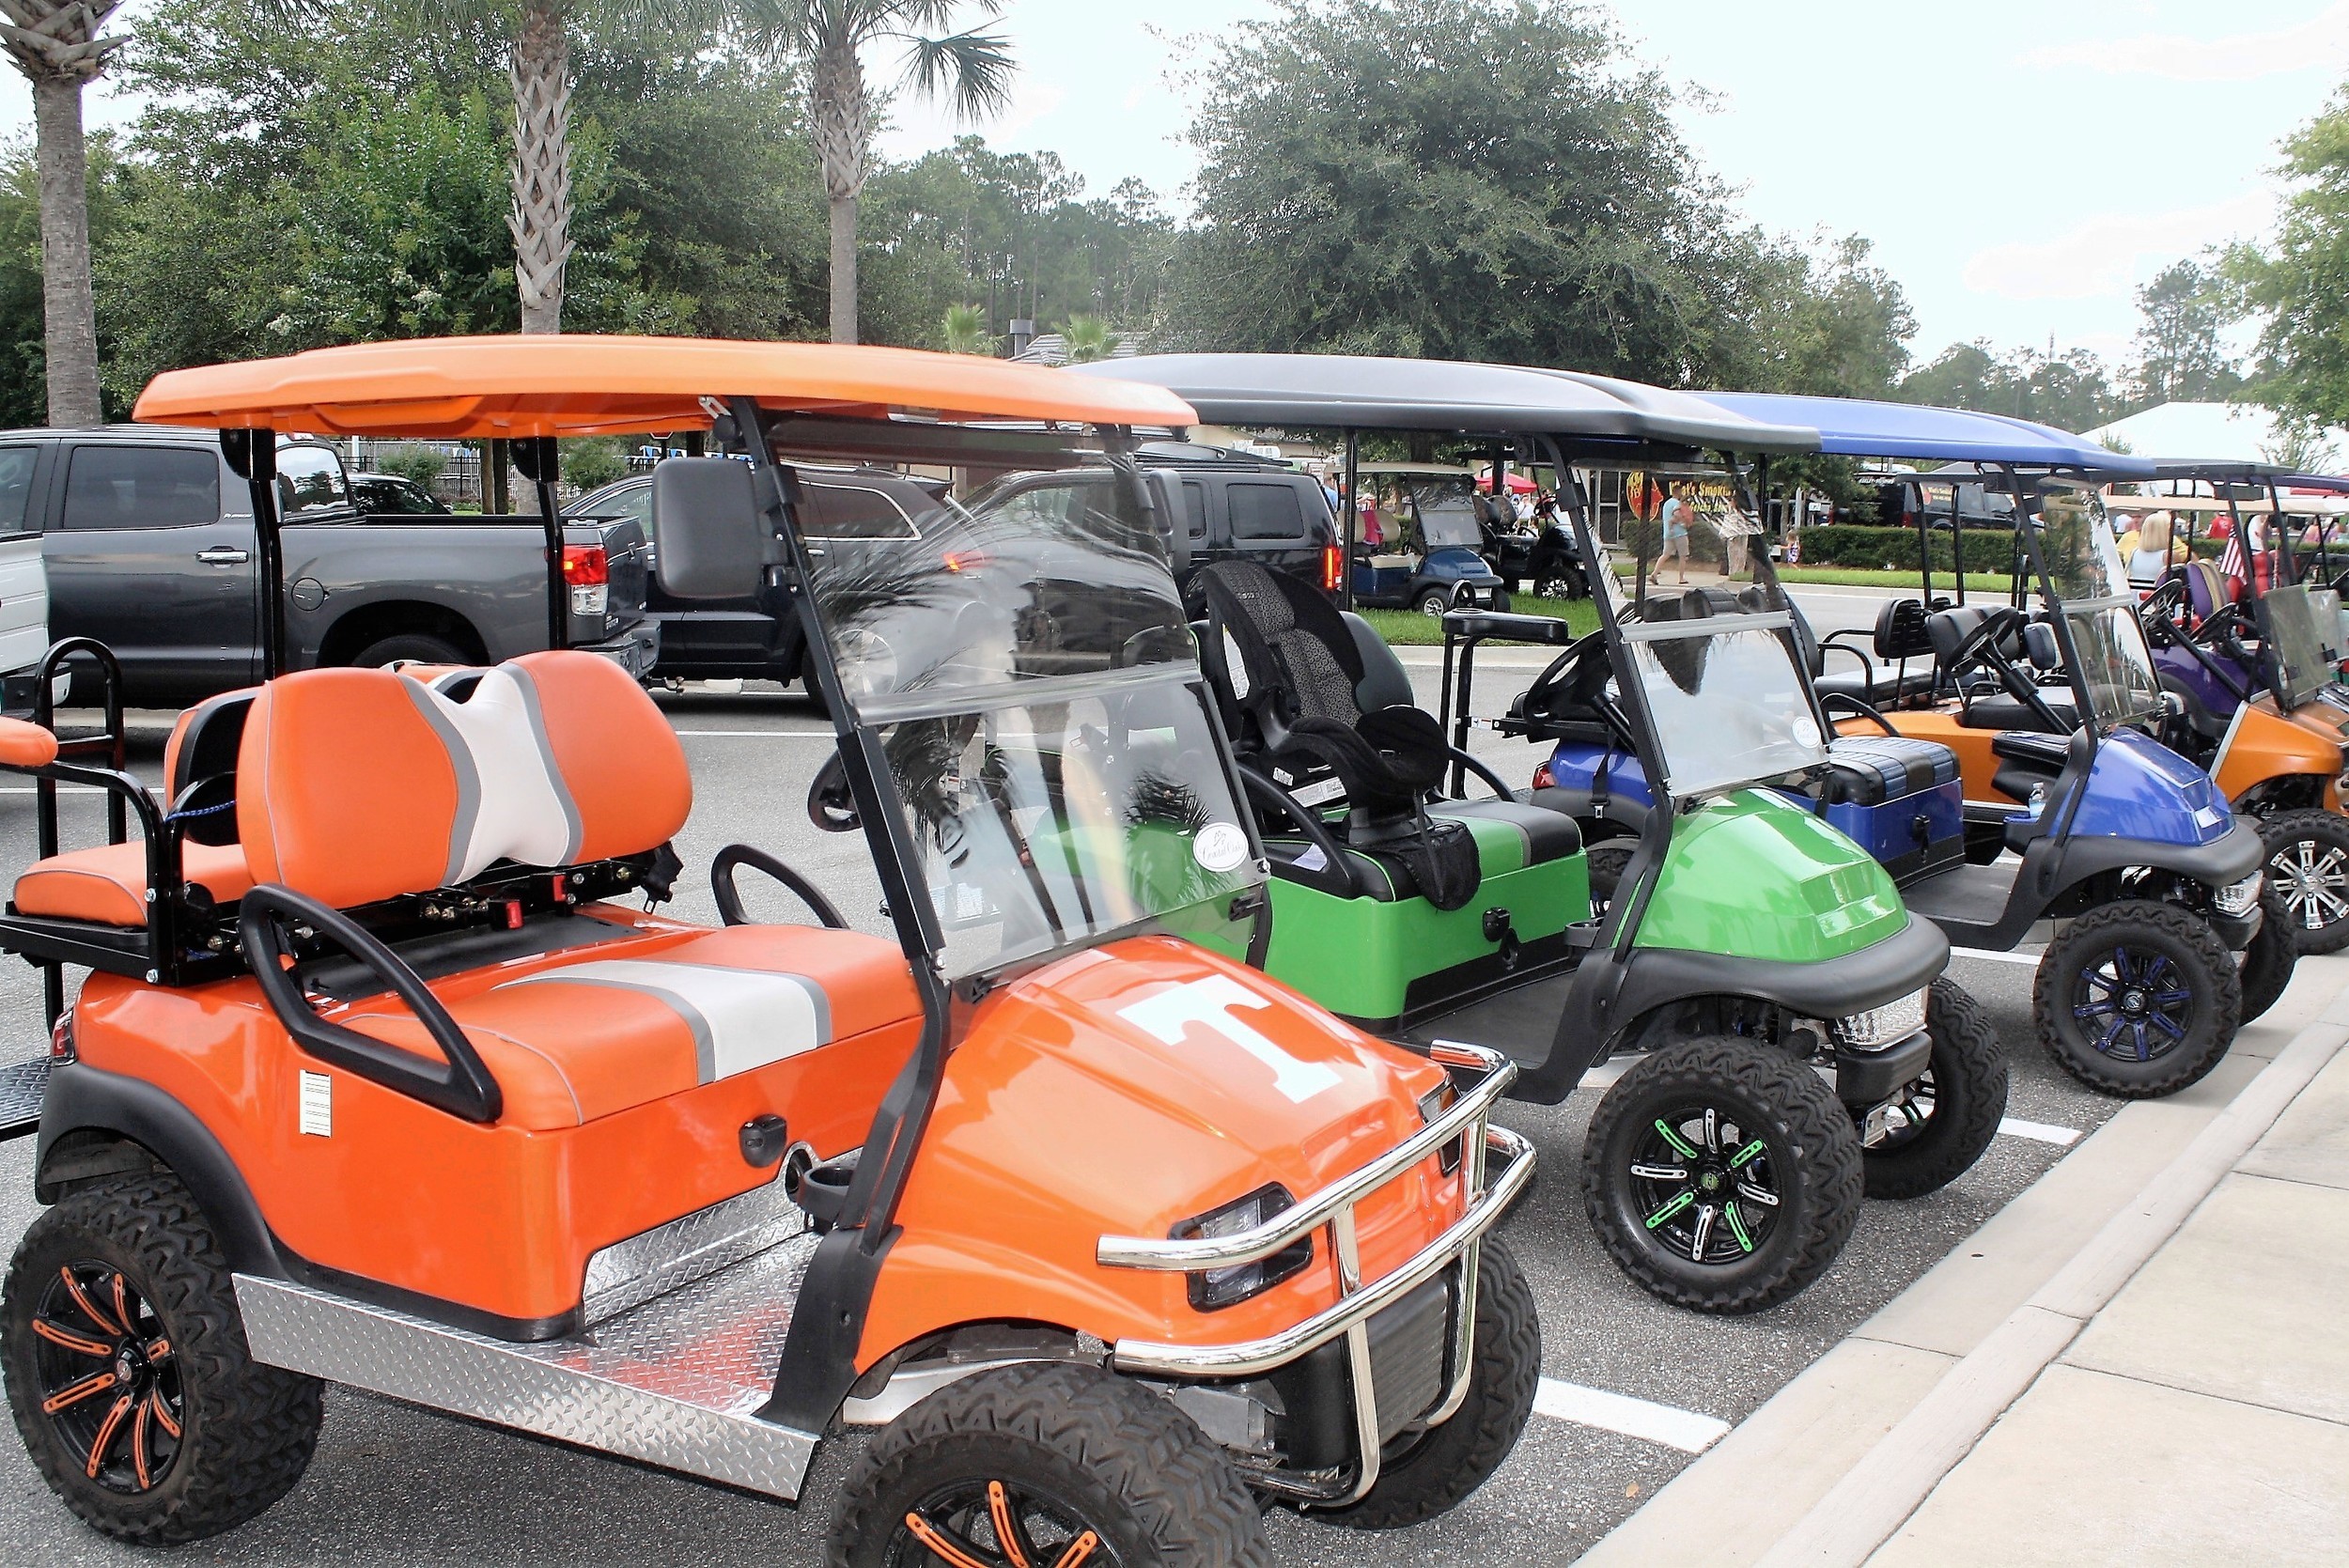 Golf carts may now be operated on the street within Duval County’s portion of Nocatee.